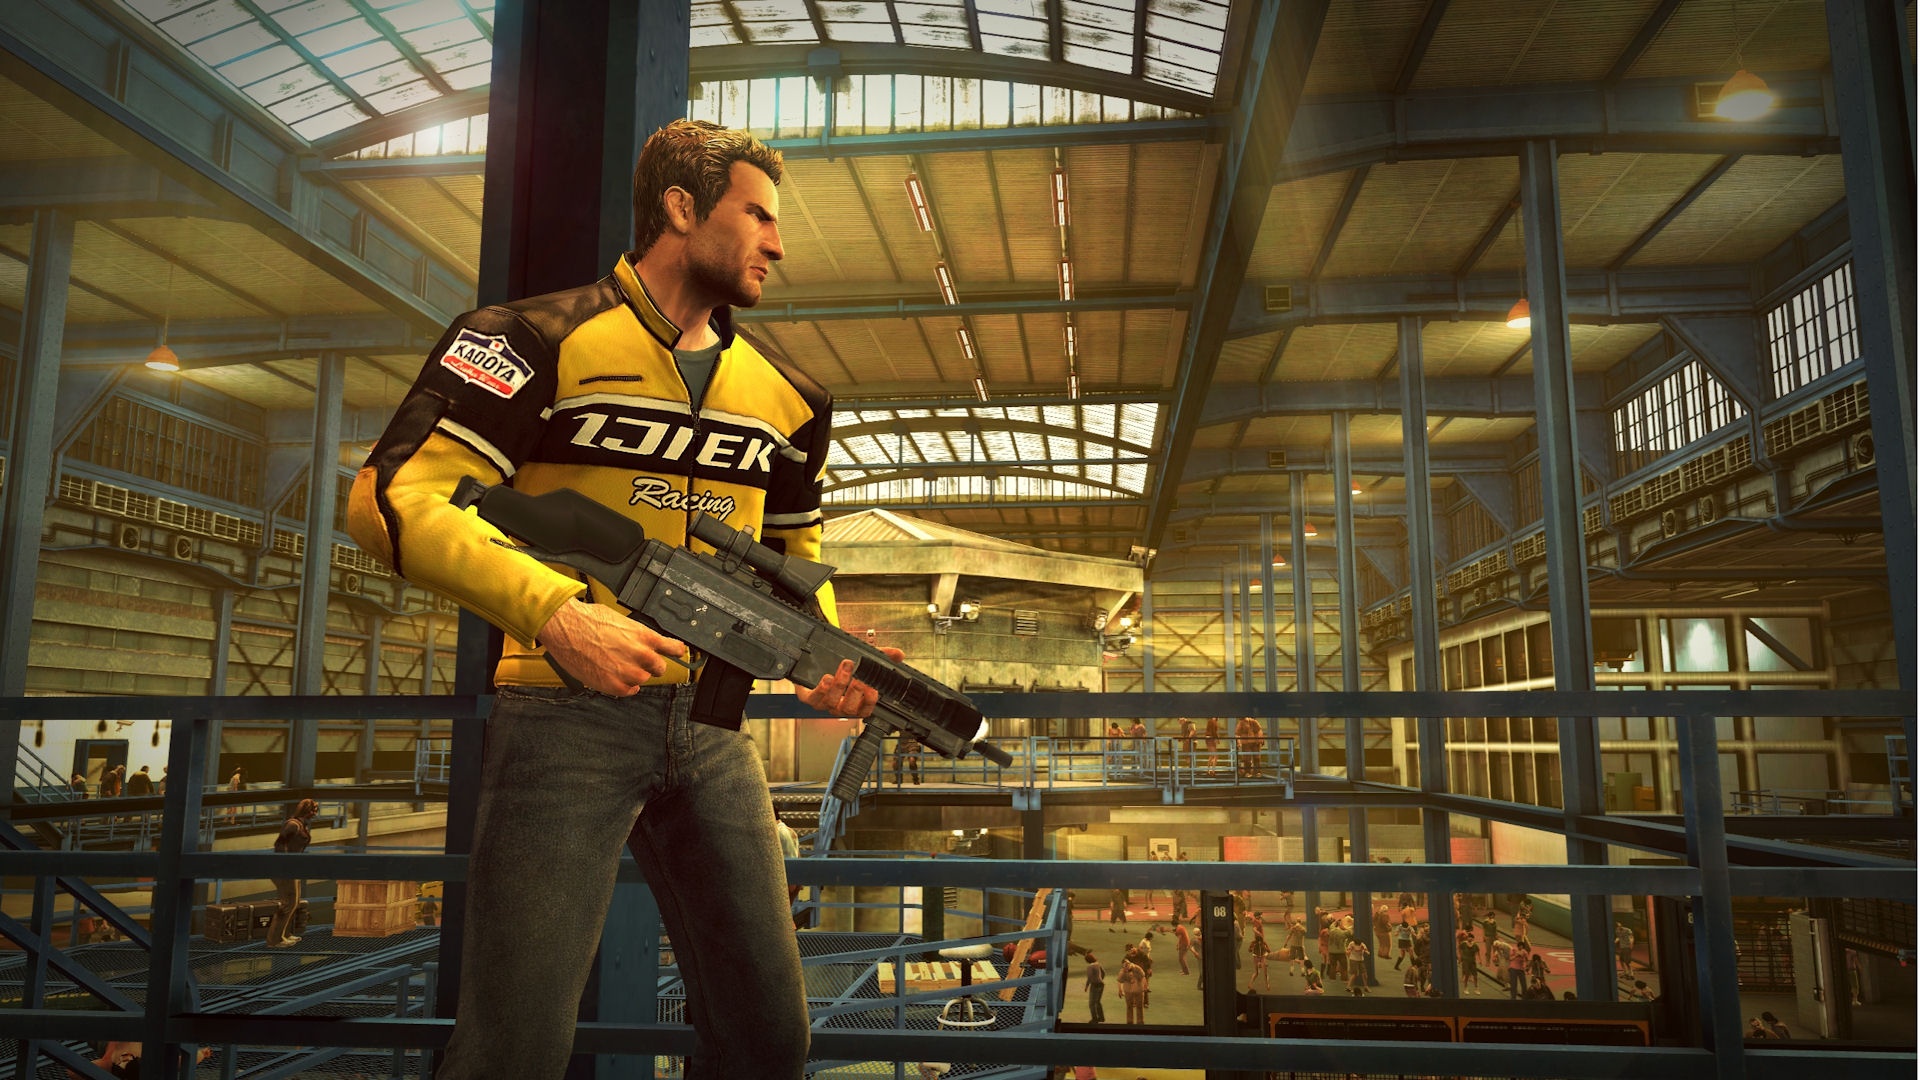 Co-Optimus - Review - Dead Rising 2: Off the Record Co-Op Review